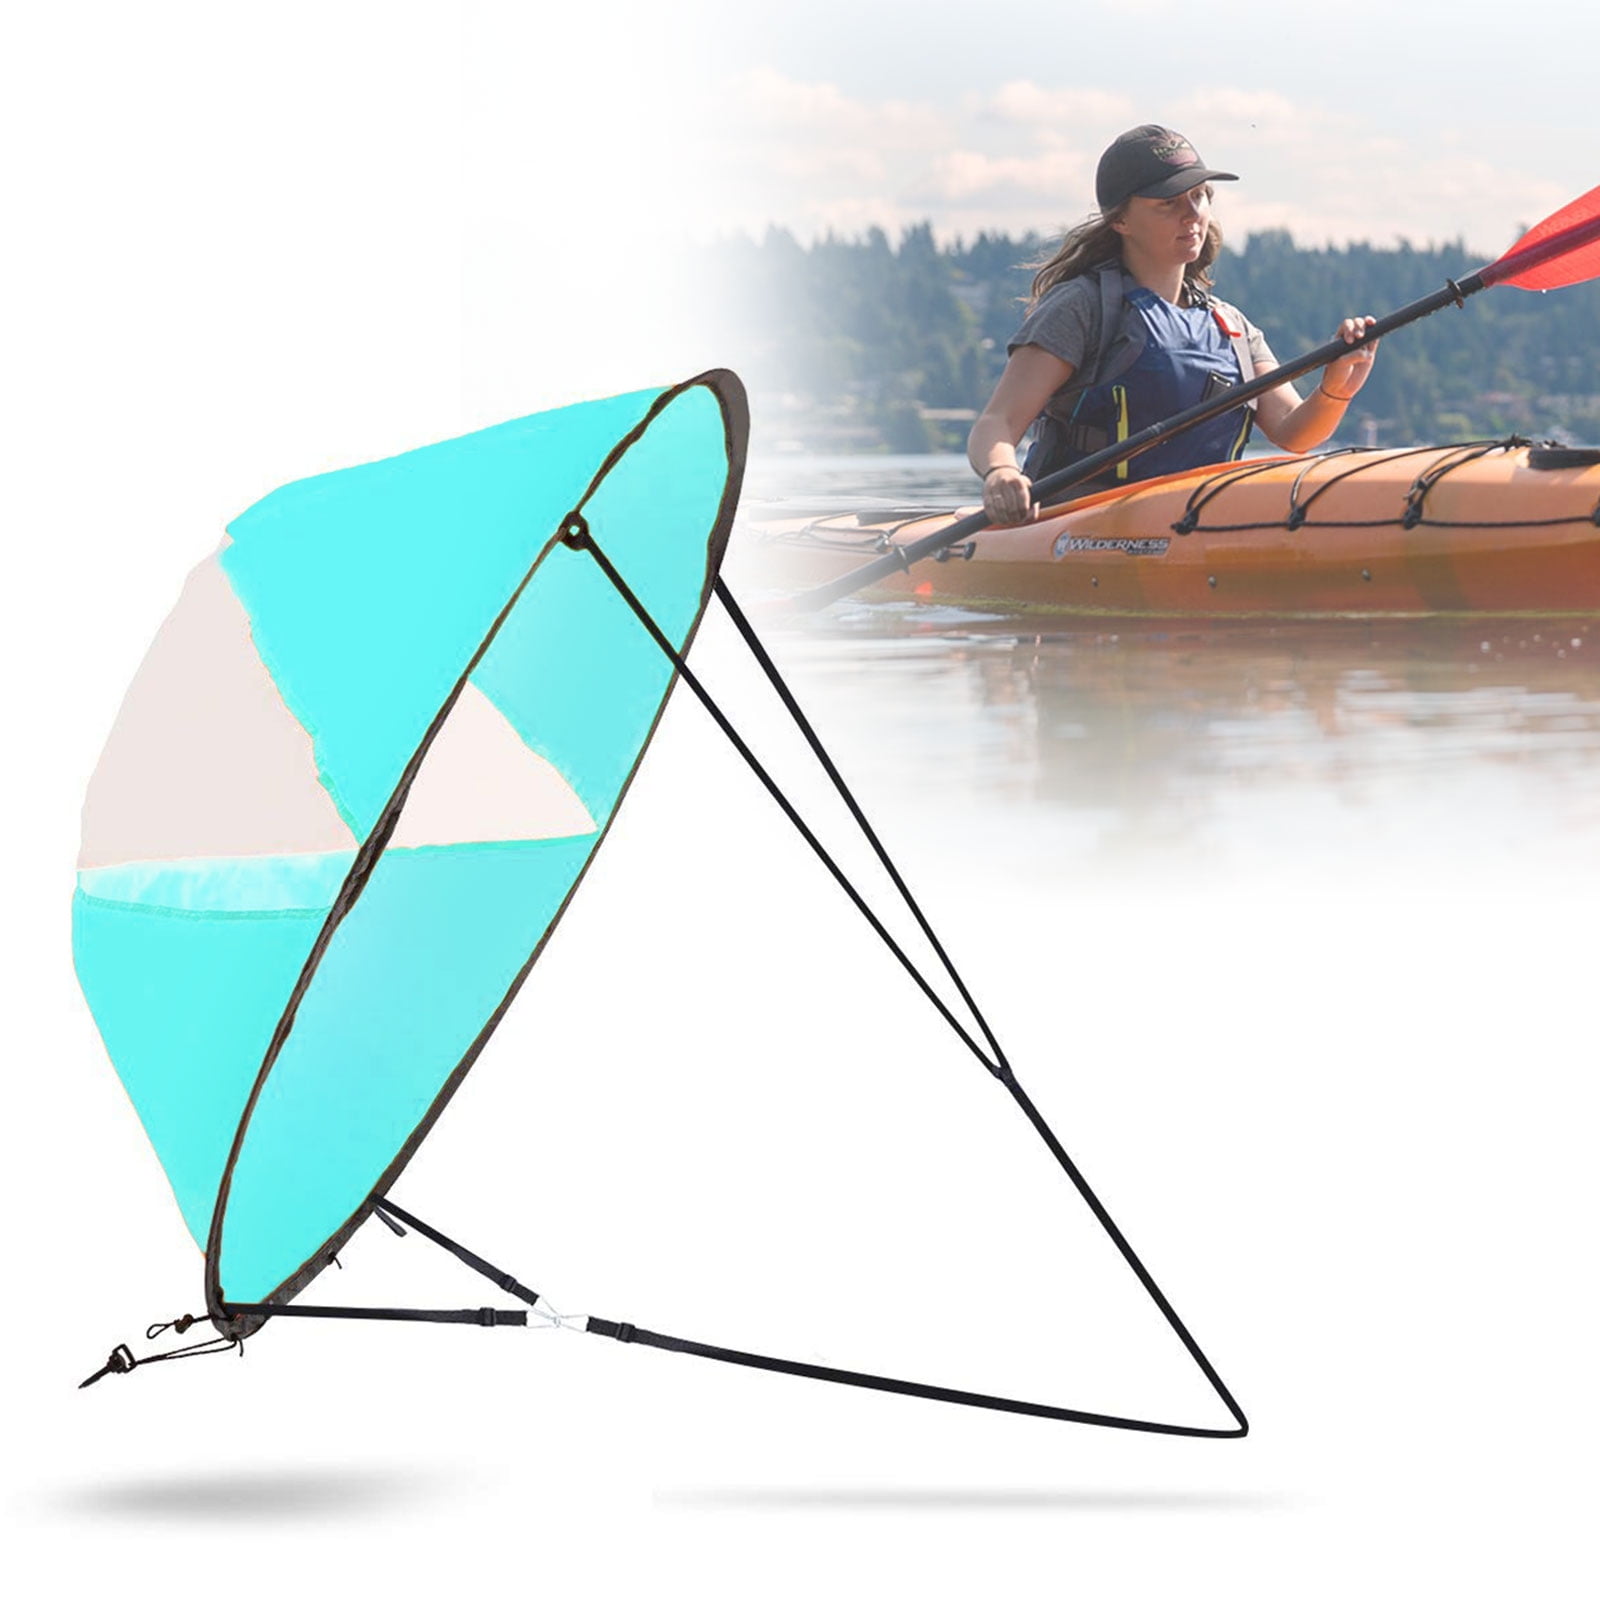 SODIAL Downwind Wind Sail Kit 42 inches Kayak Canoe Accessories Easy Setup & Deploys Quickly Compact & Portable 